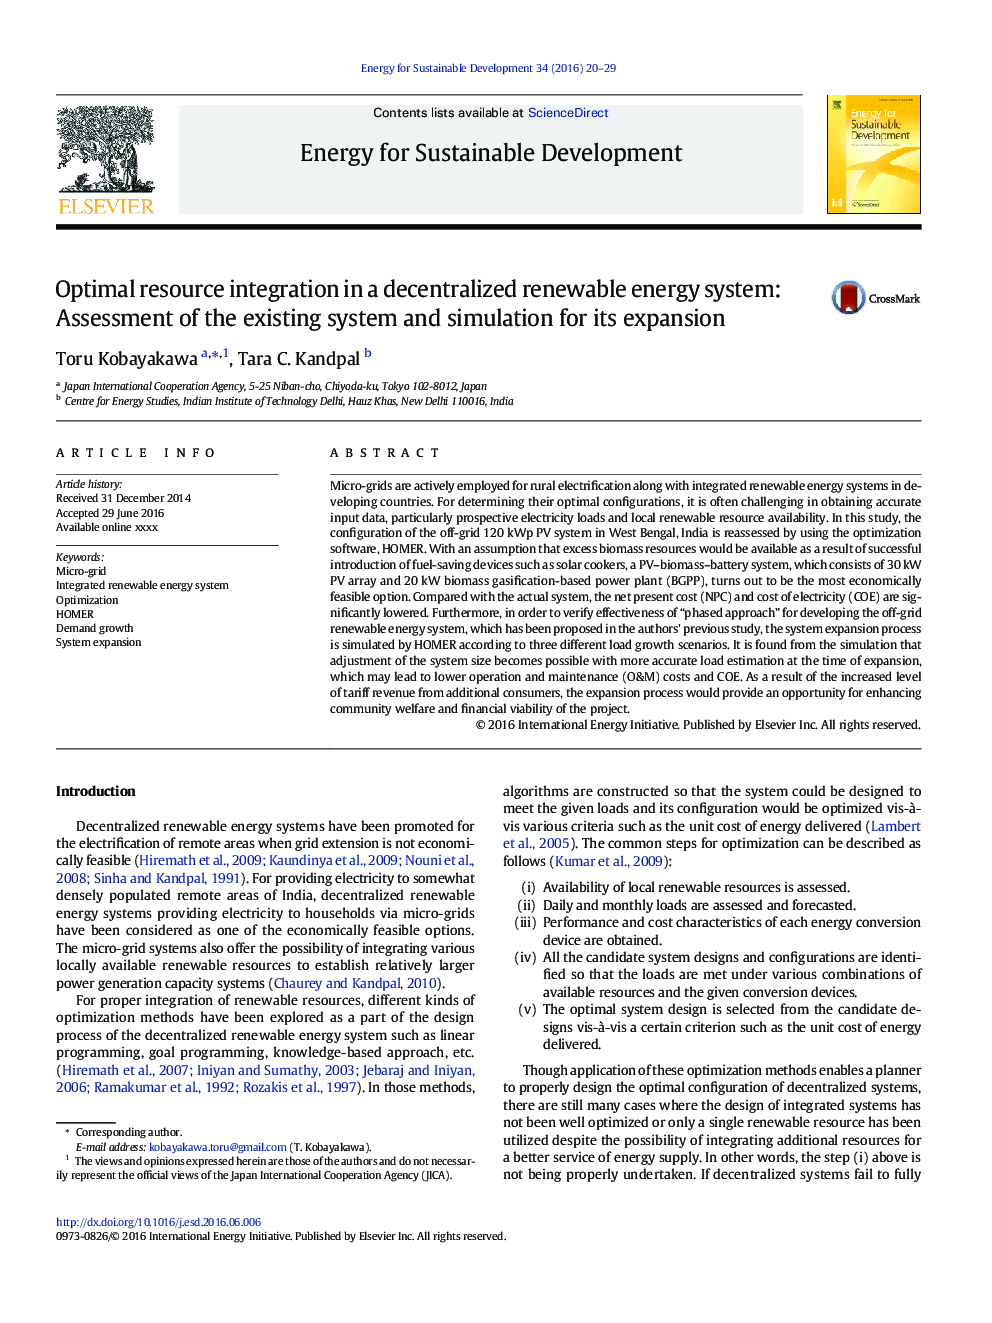 Optimal resource integration in a decentralized renewable energy system: Assessment of the existing system and simulation for its expansion